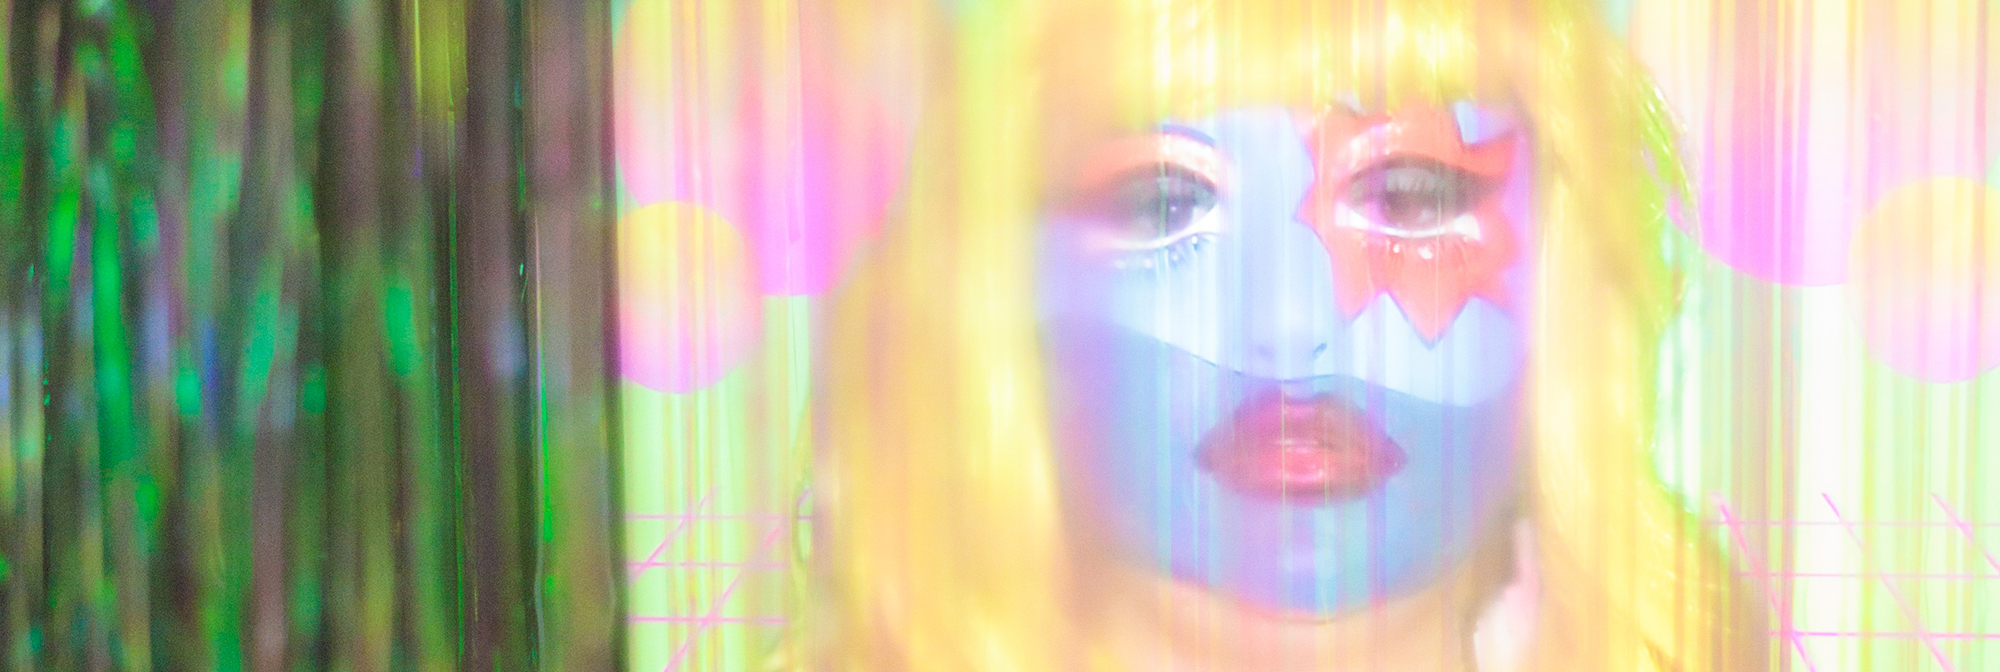 Close-up photograph of a screen showing a yellow and pink video of a woman in blue and red face make-up, wearing a yellow wig, is viewed through a curtain of iridescent green plastic streamers.